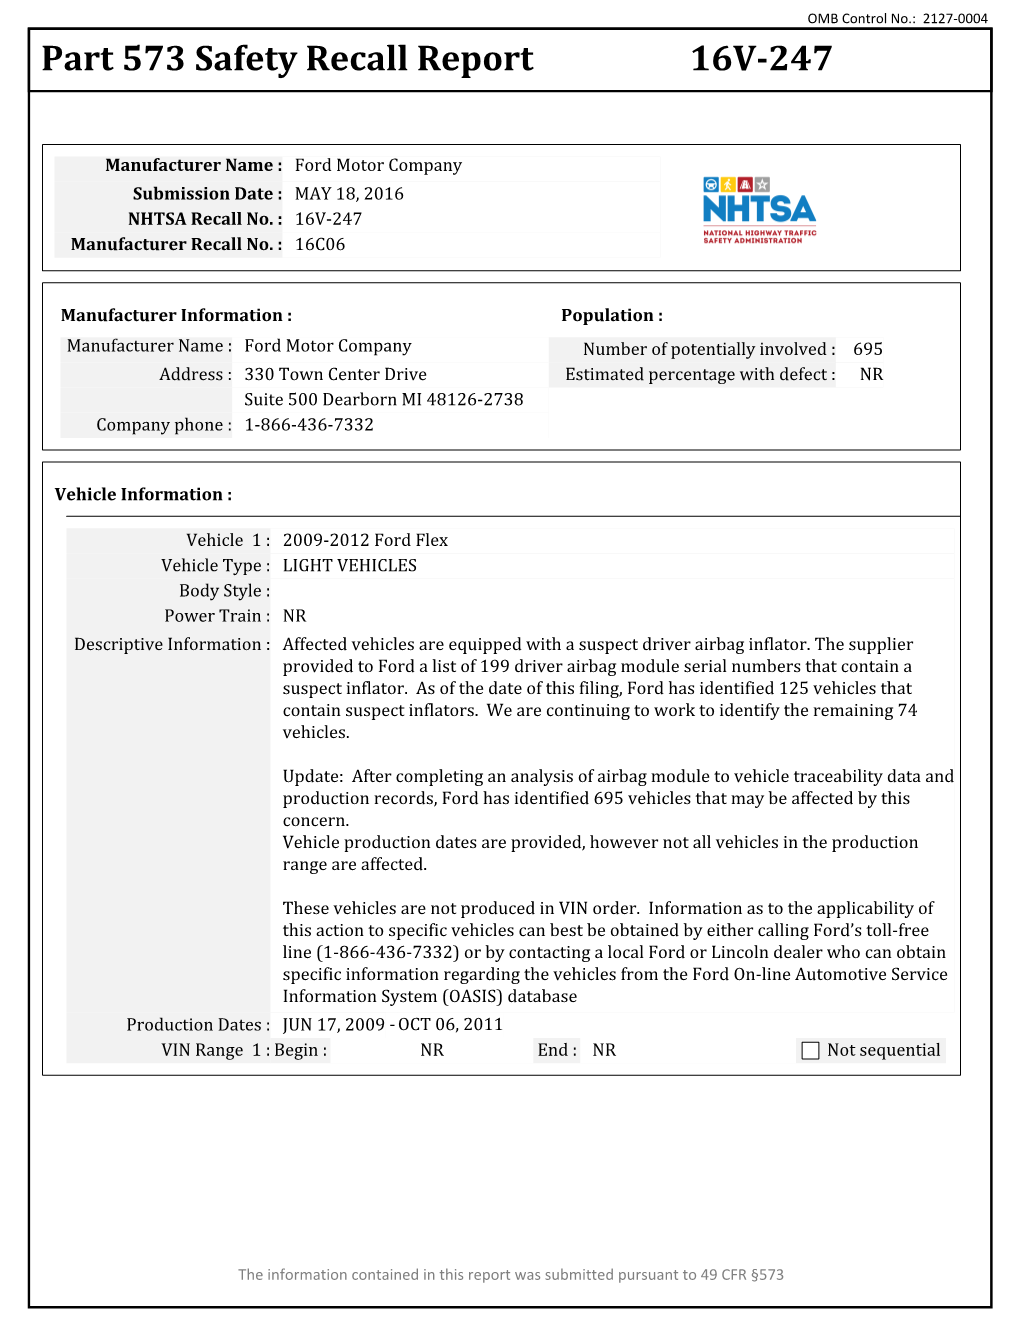 Part 573 Safety Recall Report 16V-247